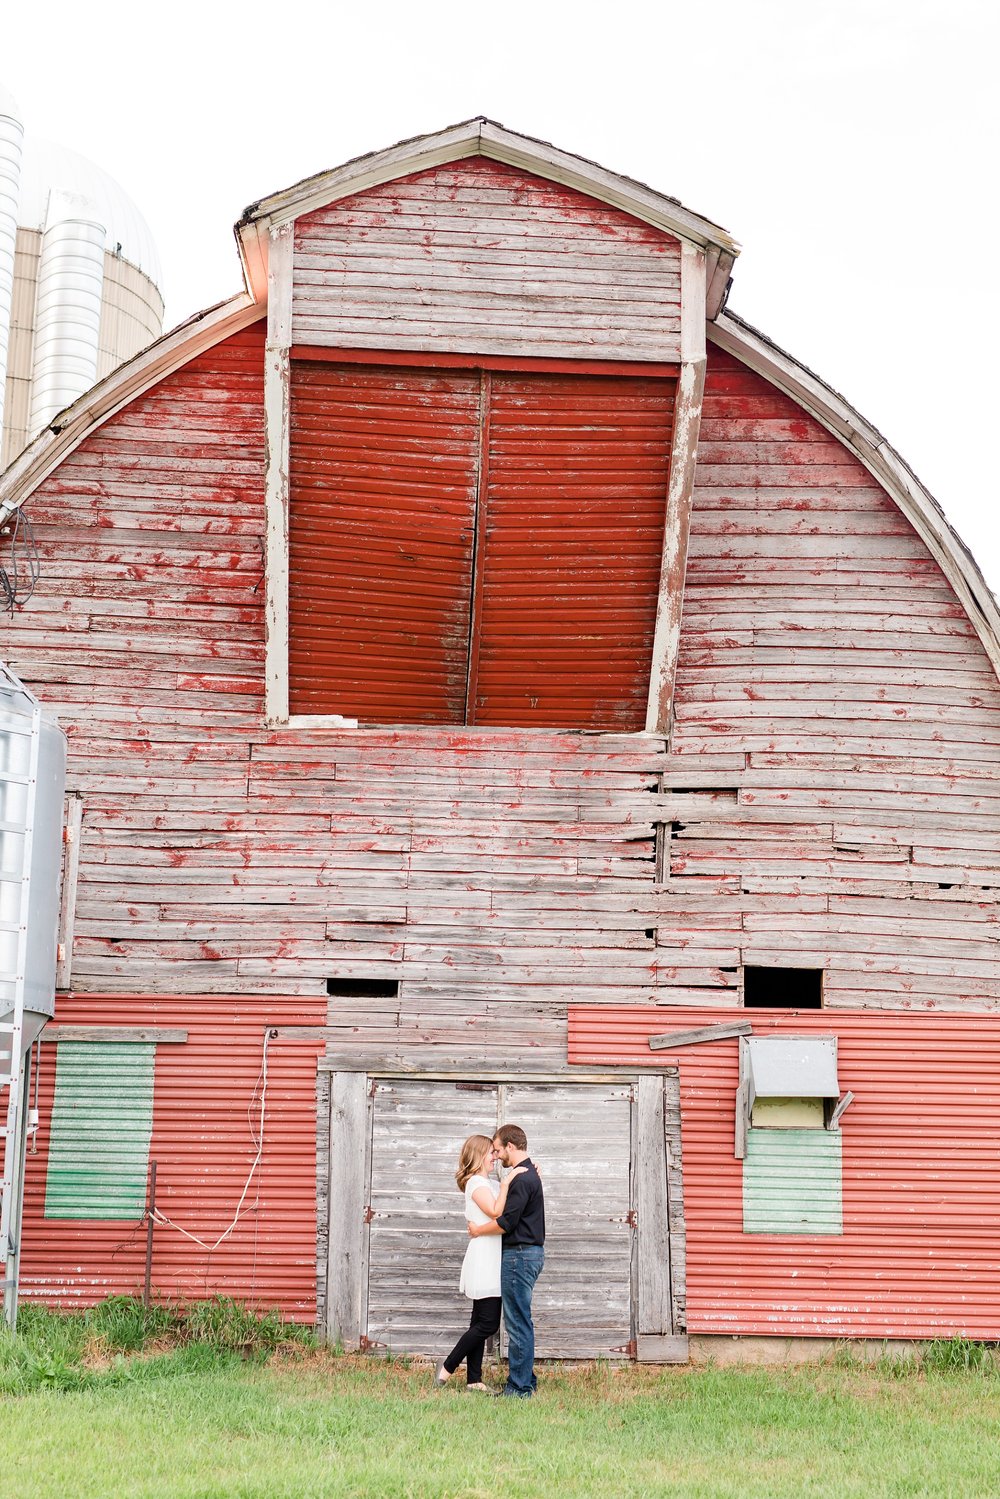 AmberLangerudPhotography_Countryside Engagement Session in Minnesota_3118.jpg